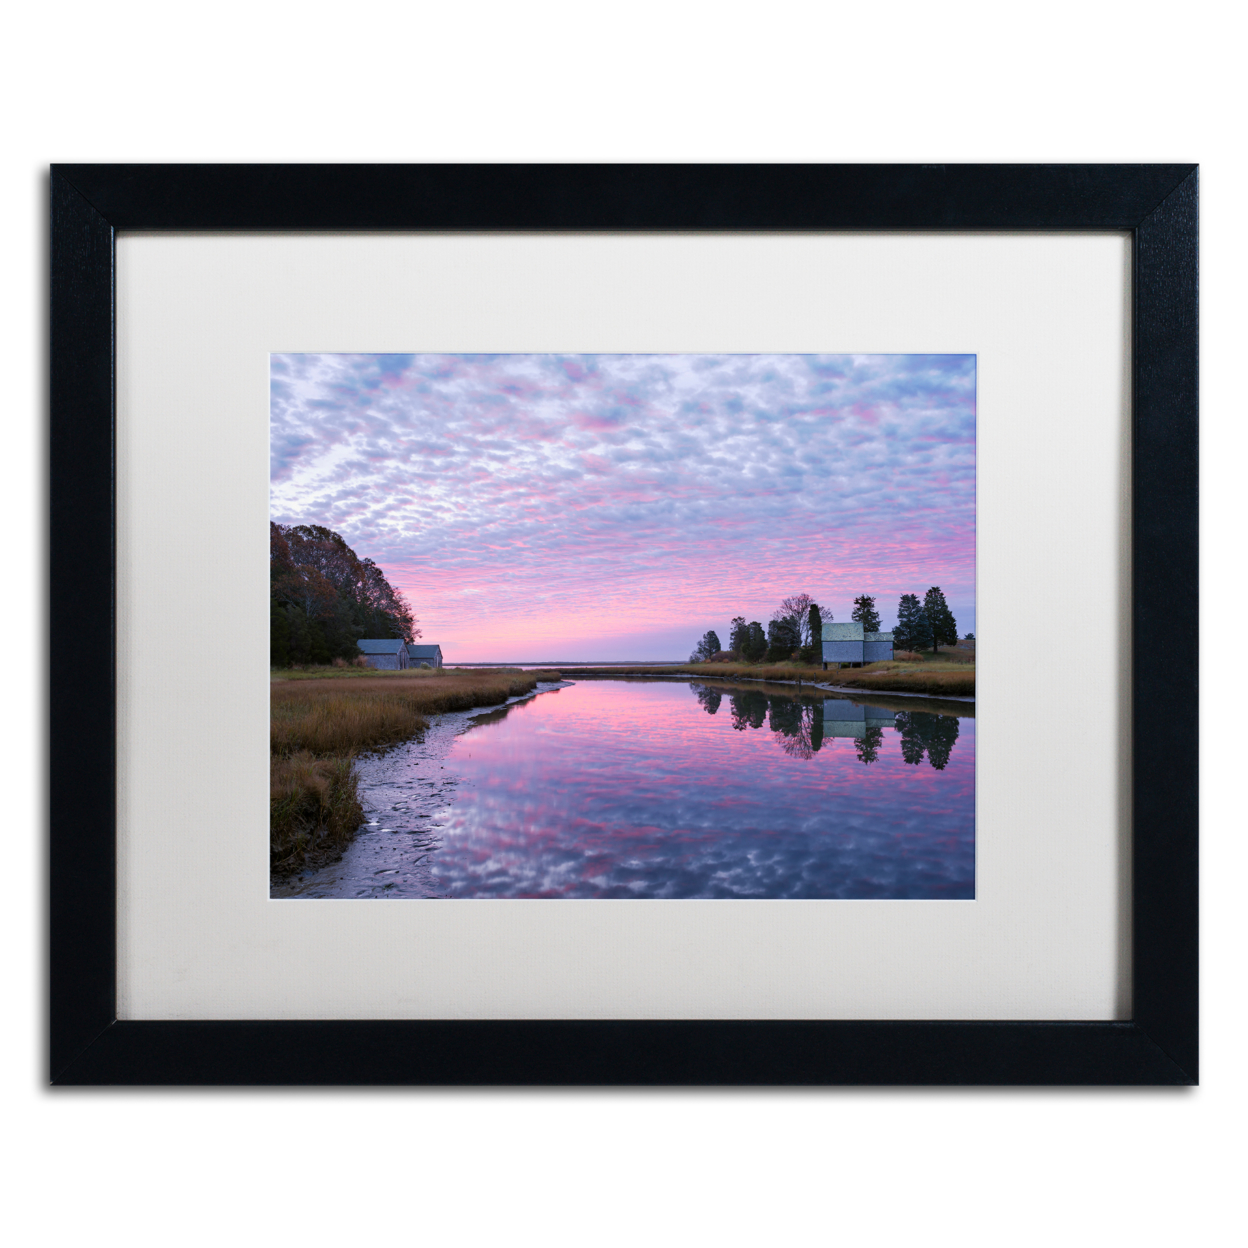 Michael Blanchette Photography 'Rosy Billow' Black Wooden Framed Art 18 X 22 Inches